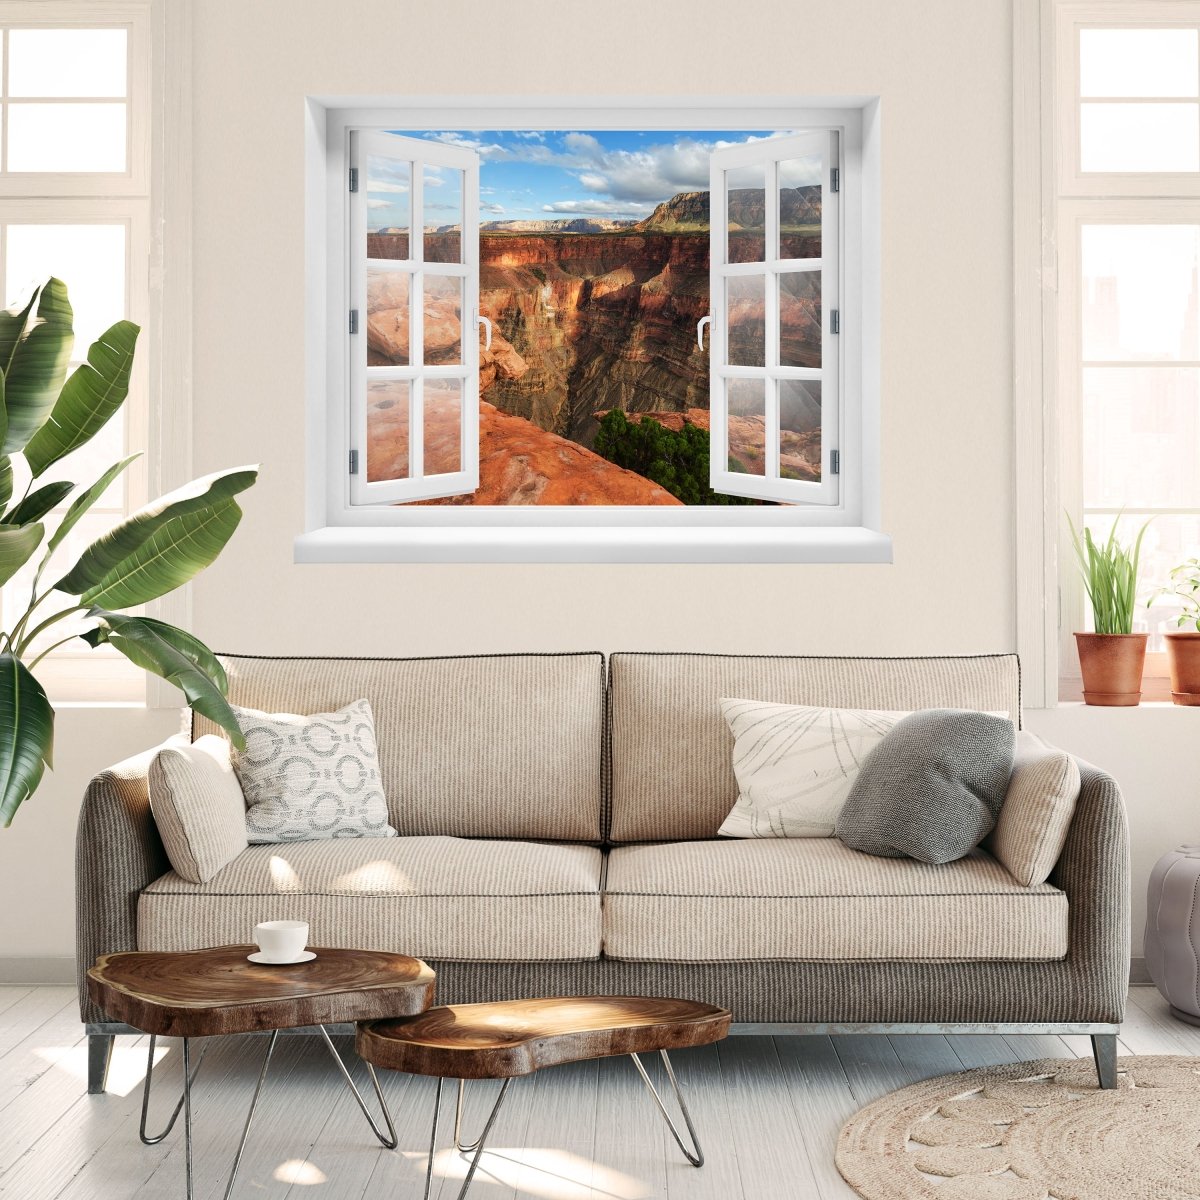 3D Wall Sticker The Grand Canyon - Wall Decal M1017